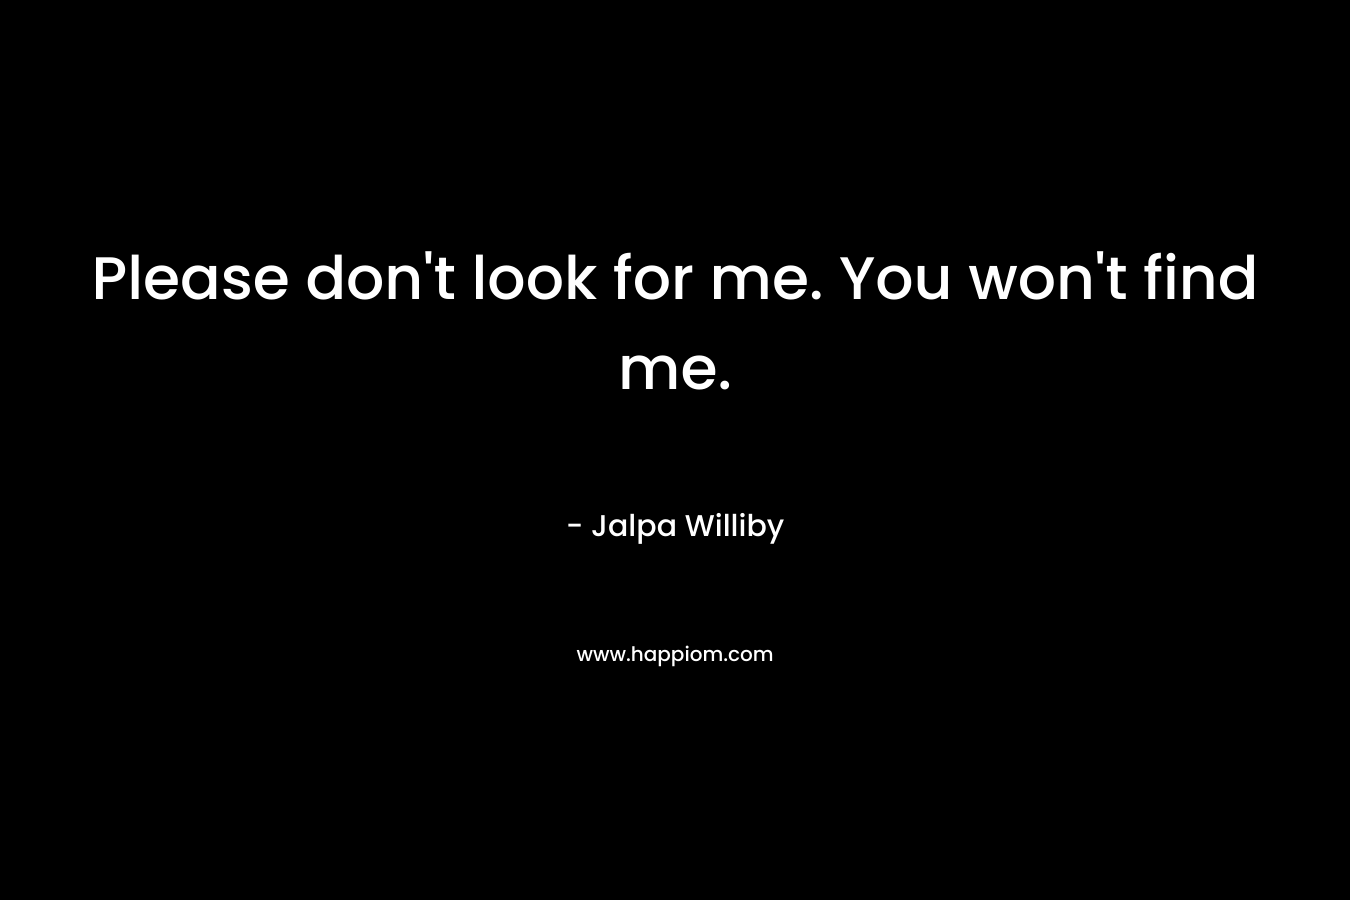 Please don’t look for me. You won’t find me. – Jalpa Williby